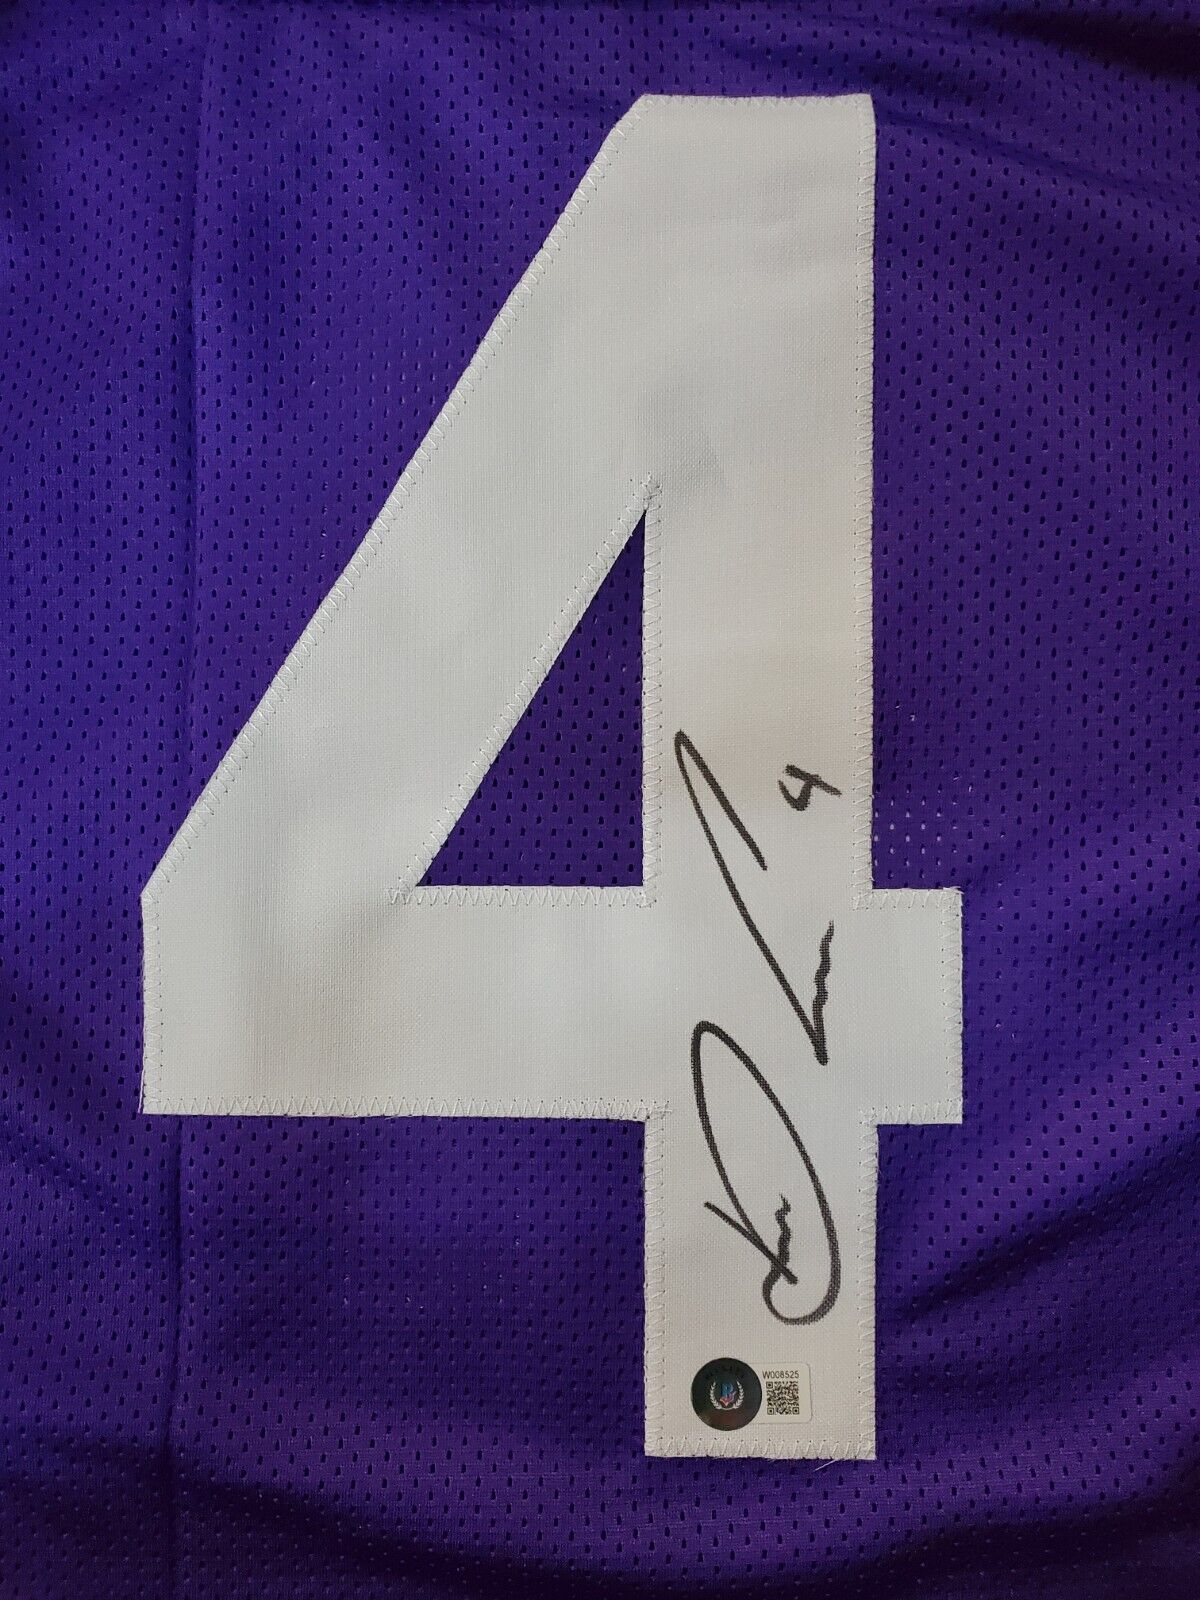 MVP Authentics Dalvin Cook Minnesota Vikings Autographed Signed Jersey Beckett Holo 175.50 sports jersey framing , jersey framing